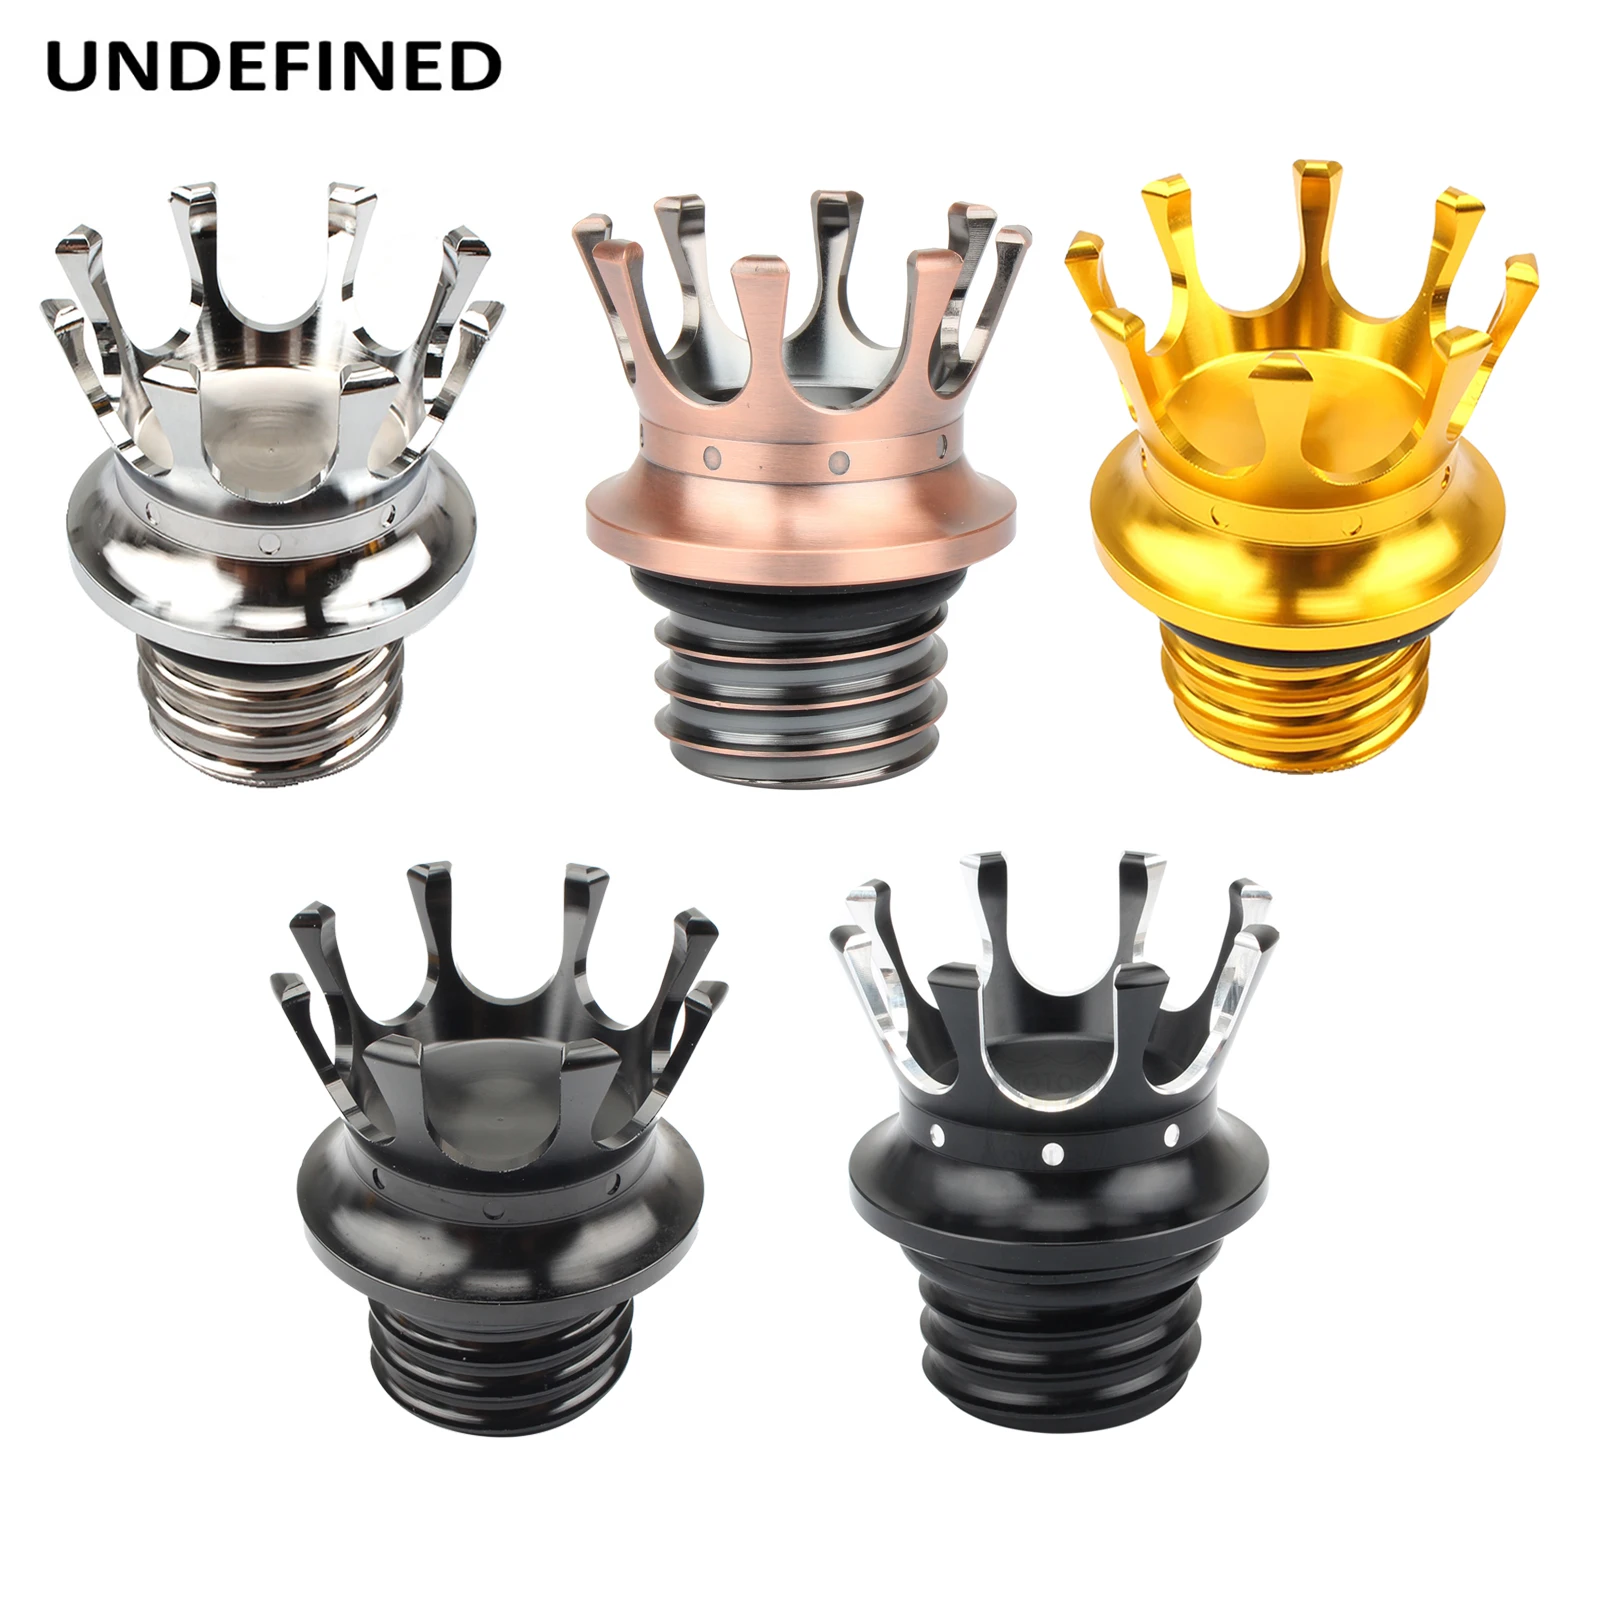 

Motorcycle Fuel Gas Tank Cap Crown Style Oil Caps for Harley Sportster XL Softail Dyna FLST Touring Road King Right-hand Thread